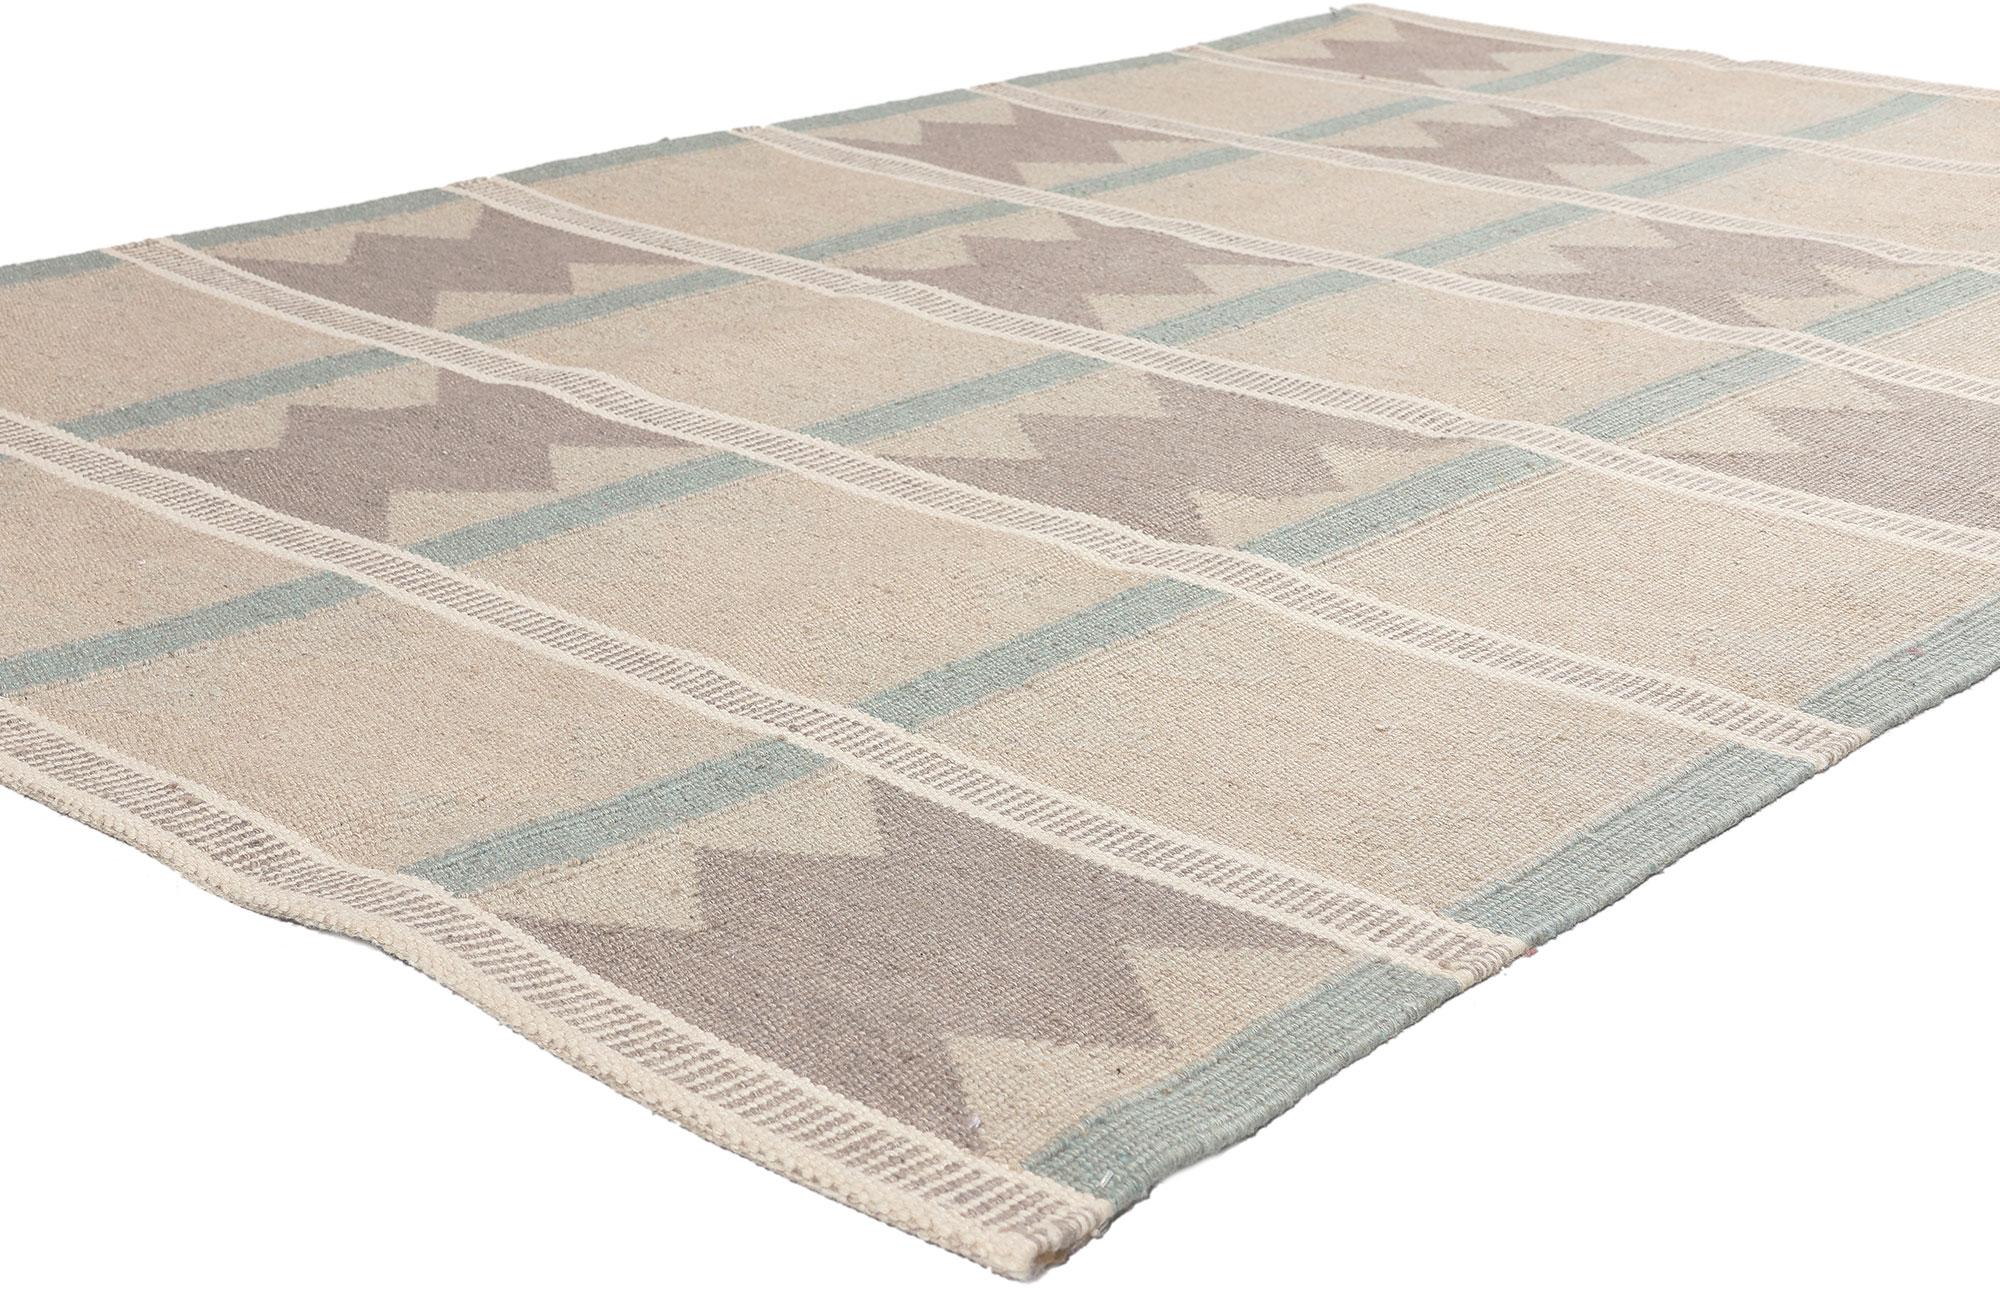 30804 Ingegerd Silow Swedish Inspired Kilim Rug, 05'01 x 08'01.
Sublime simplicity meets Scandinavian Modern style in this handwoven Swedish inspired Kilim rug. The geometric panel design and earthy hues woven into this piece work together creating